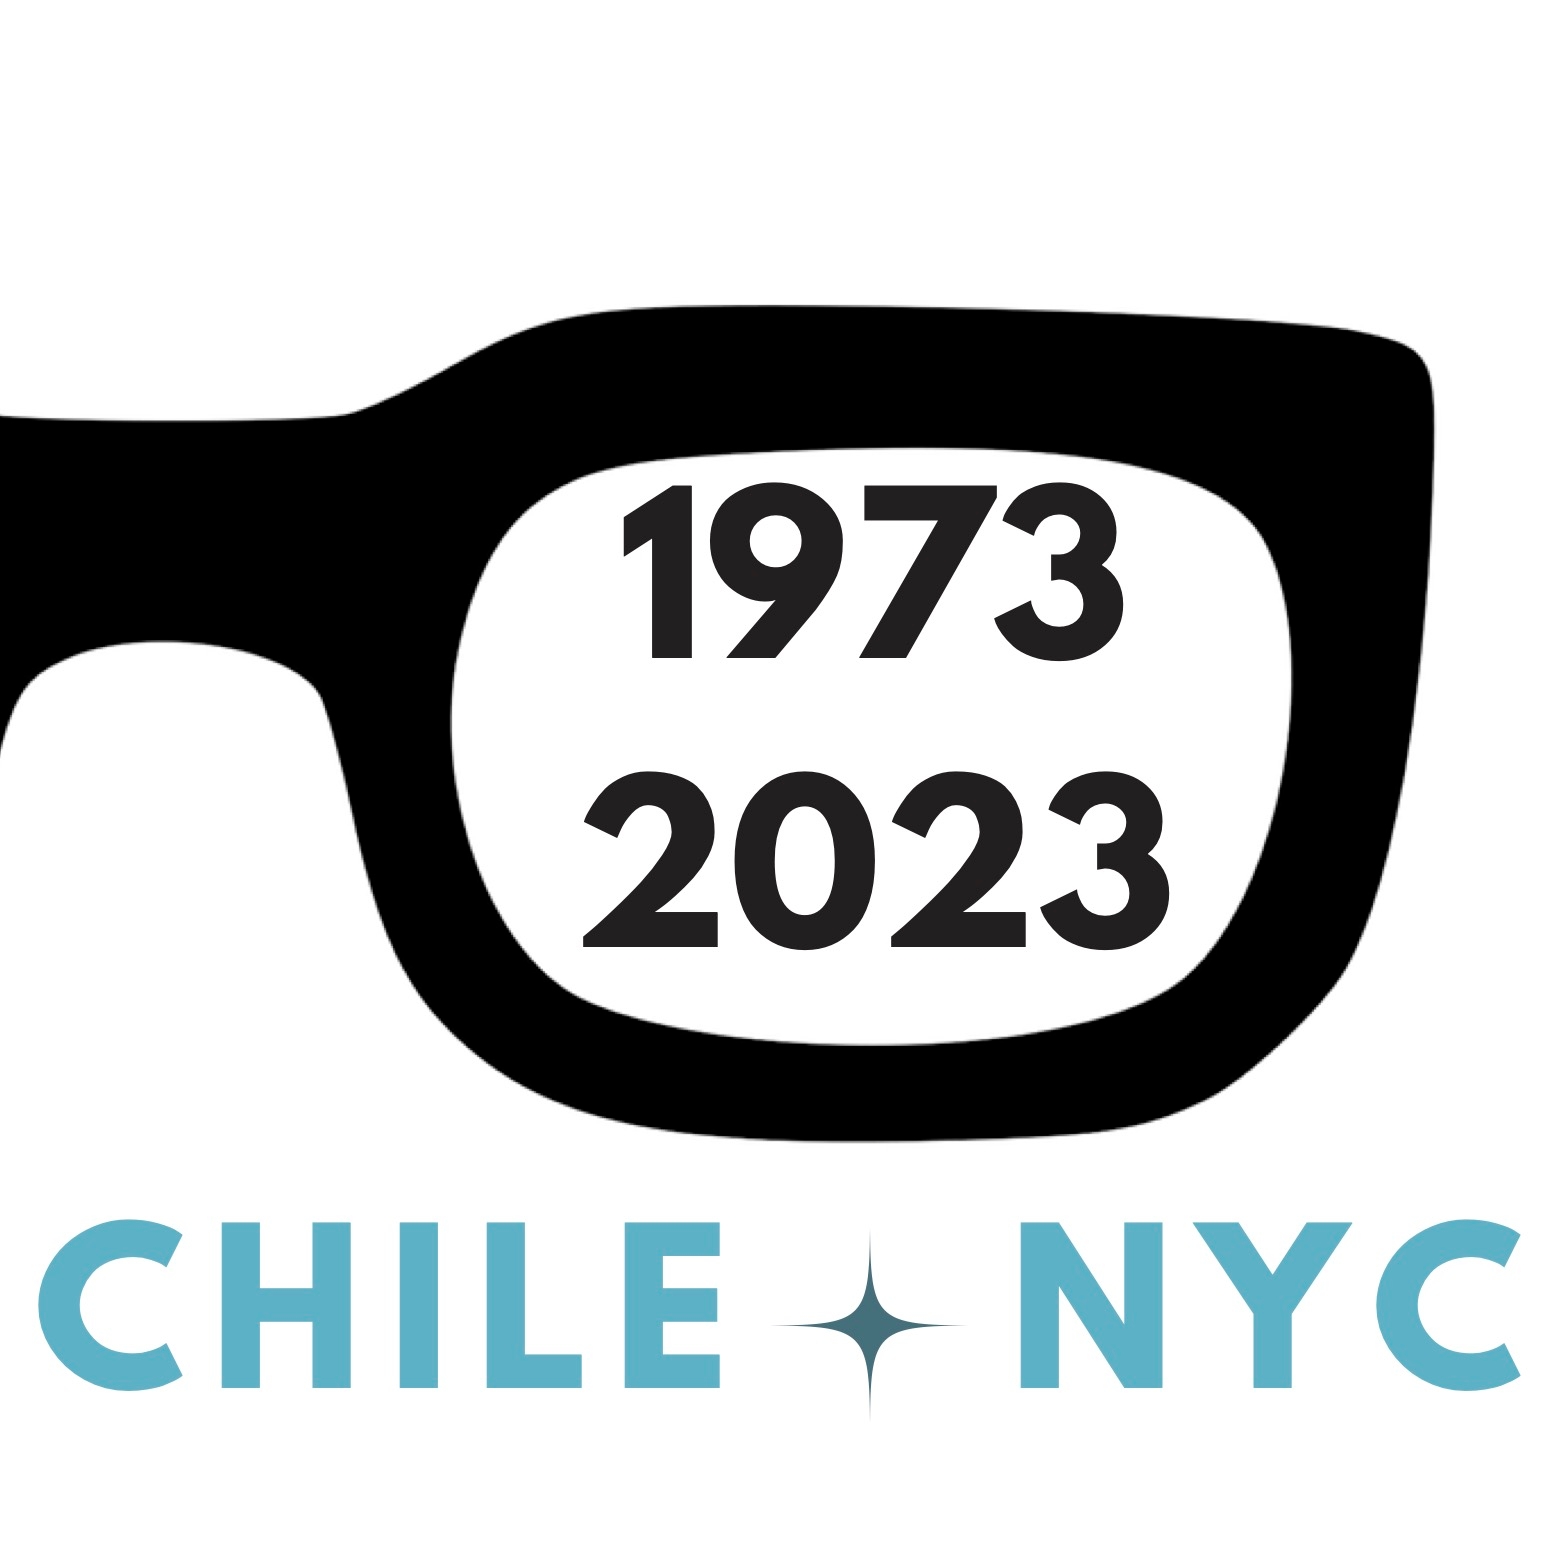 half of an eyeglasses with the text 1973-2023 Chile and NYC